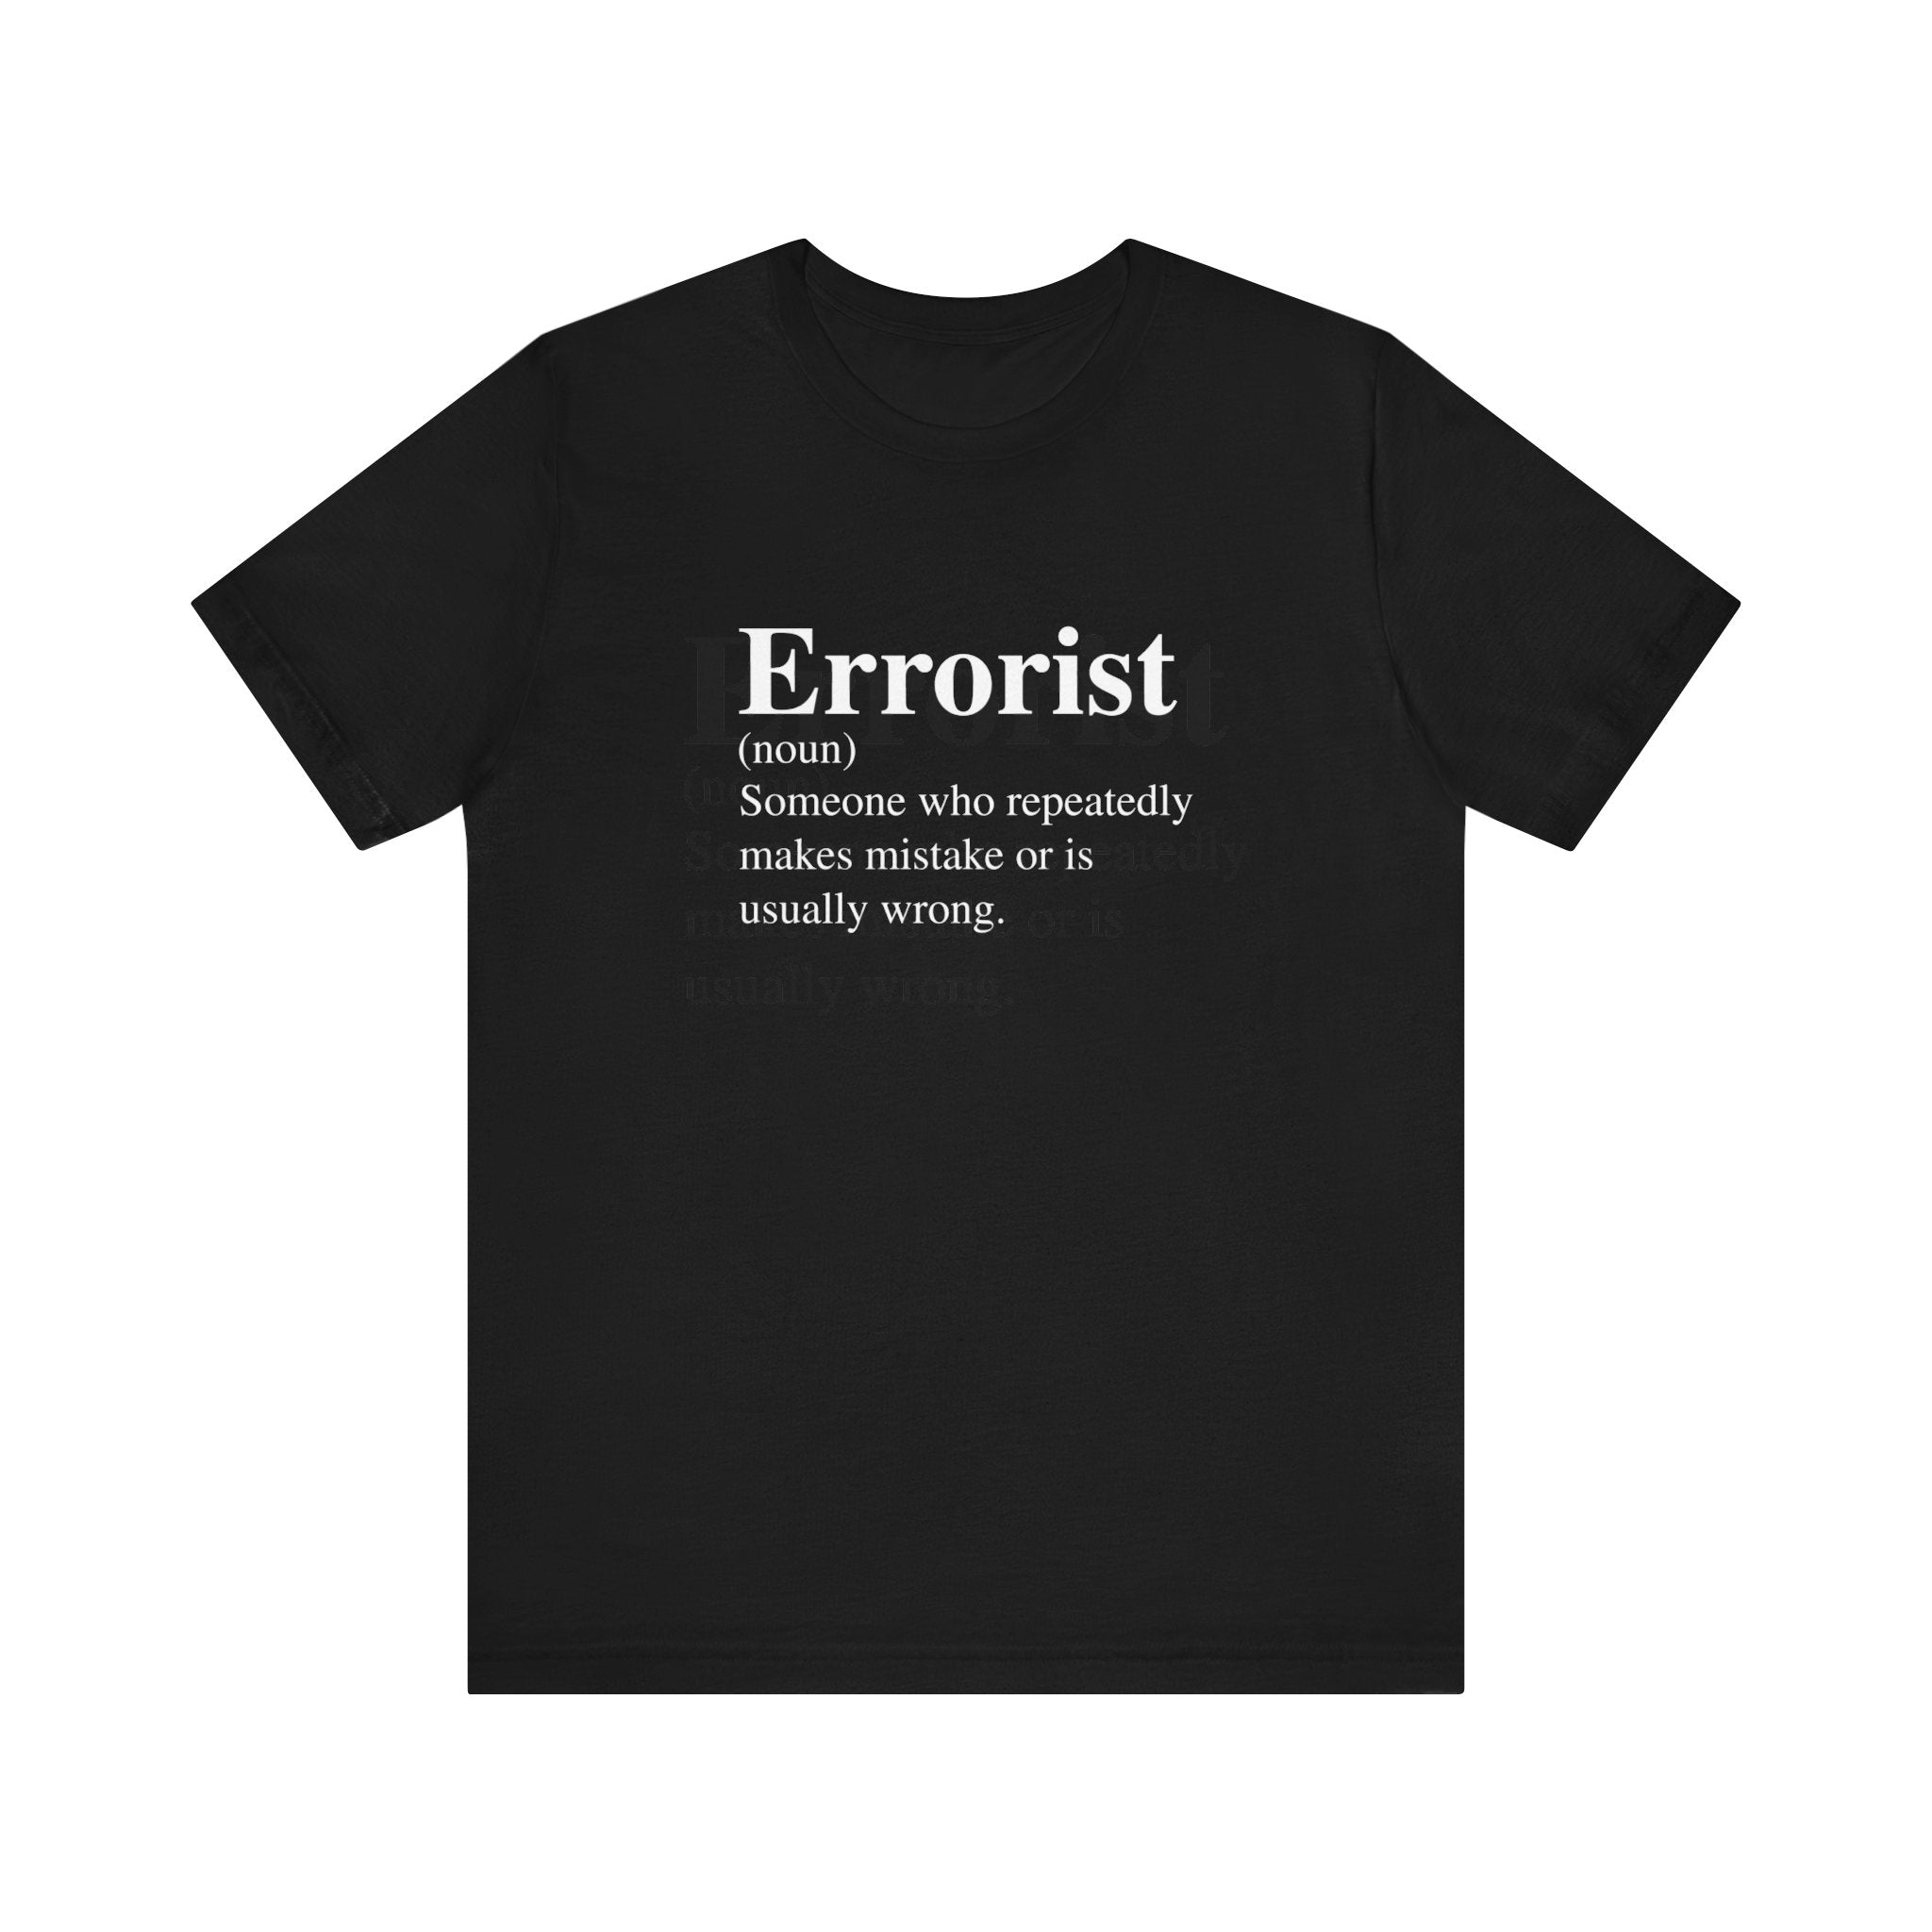 Errorist T-Shirt made of soft cotton with white text defining "Errorist" as "someone who repeatedly makes mistakes or is usually wrong.